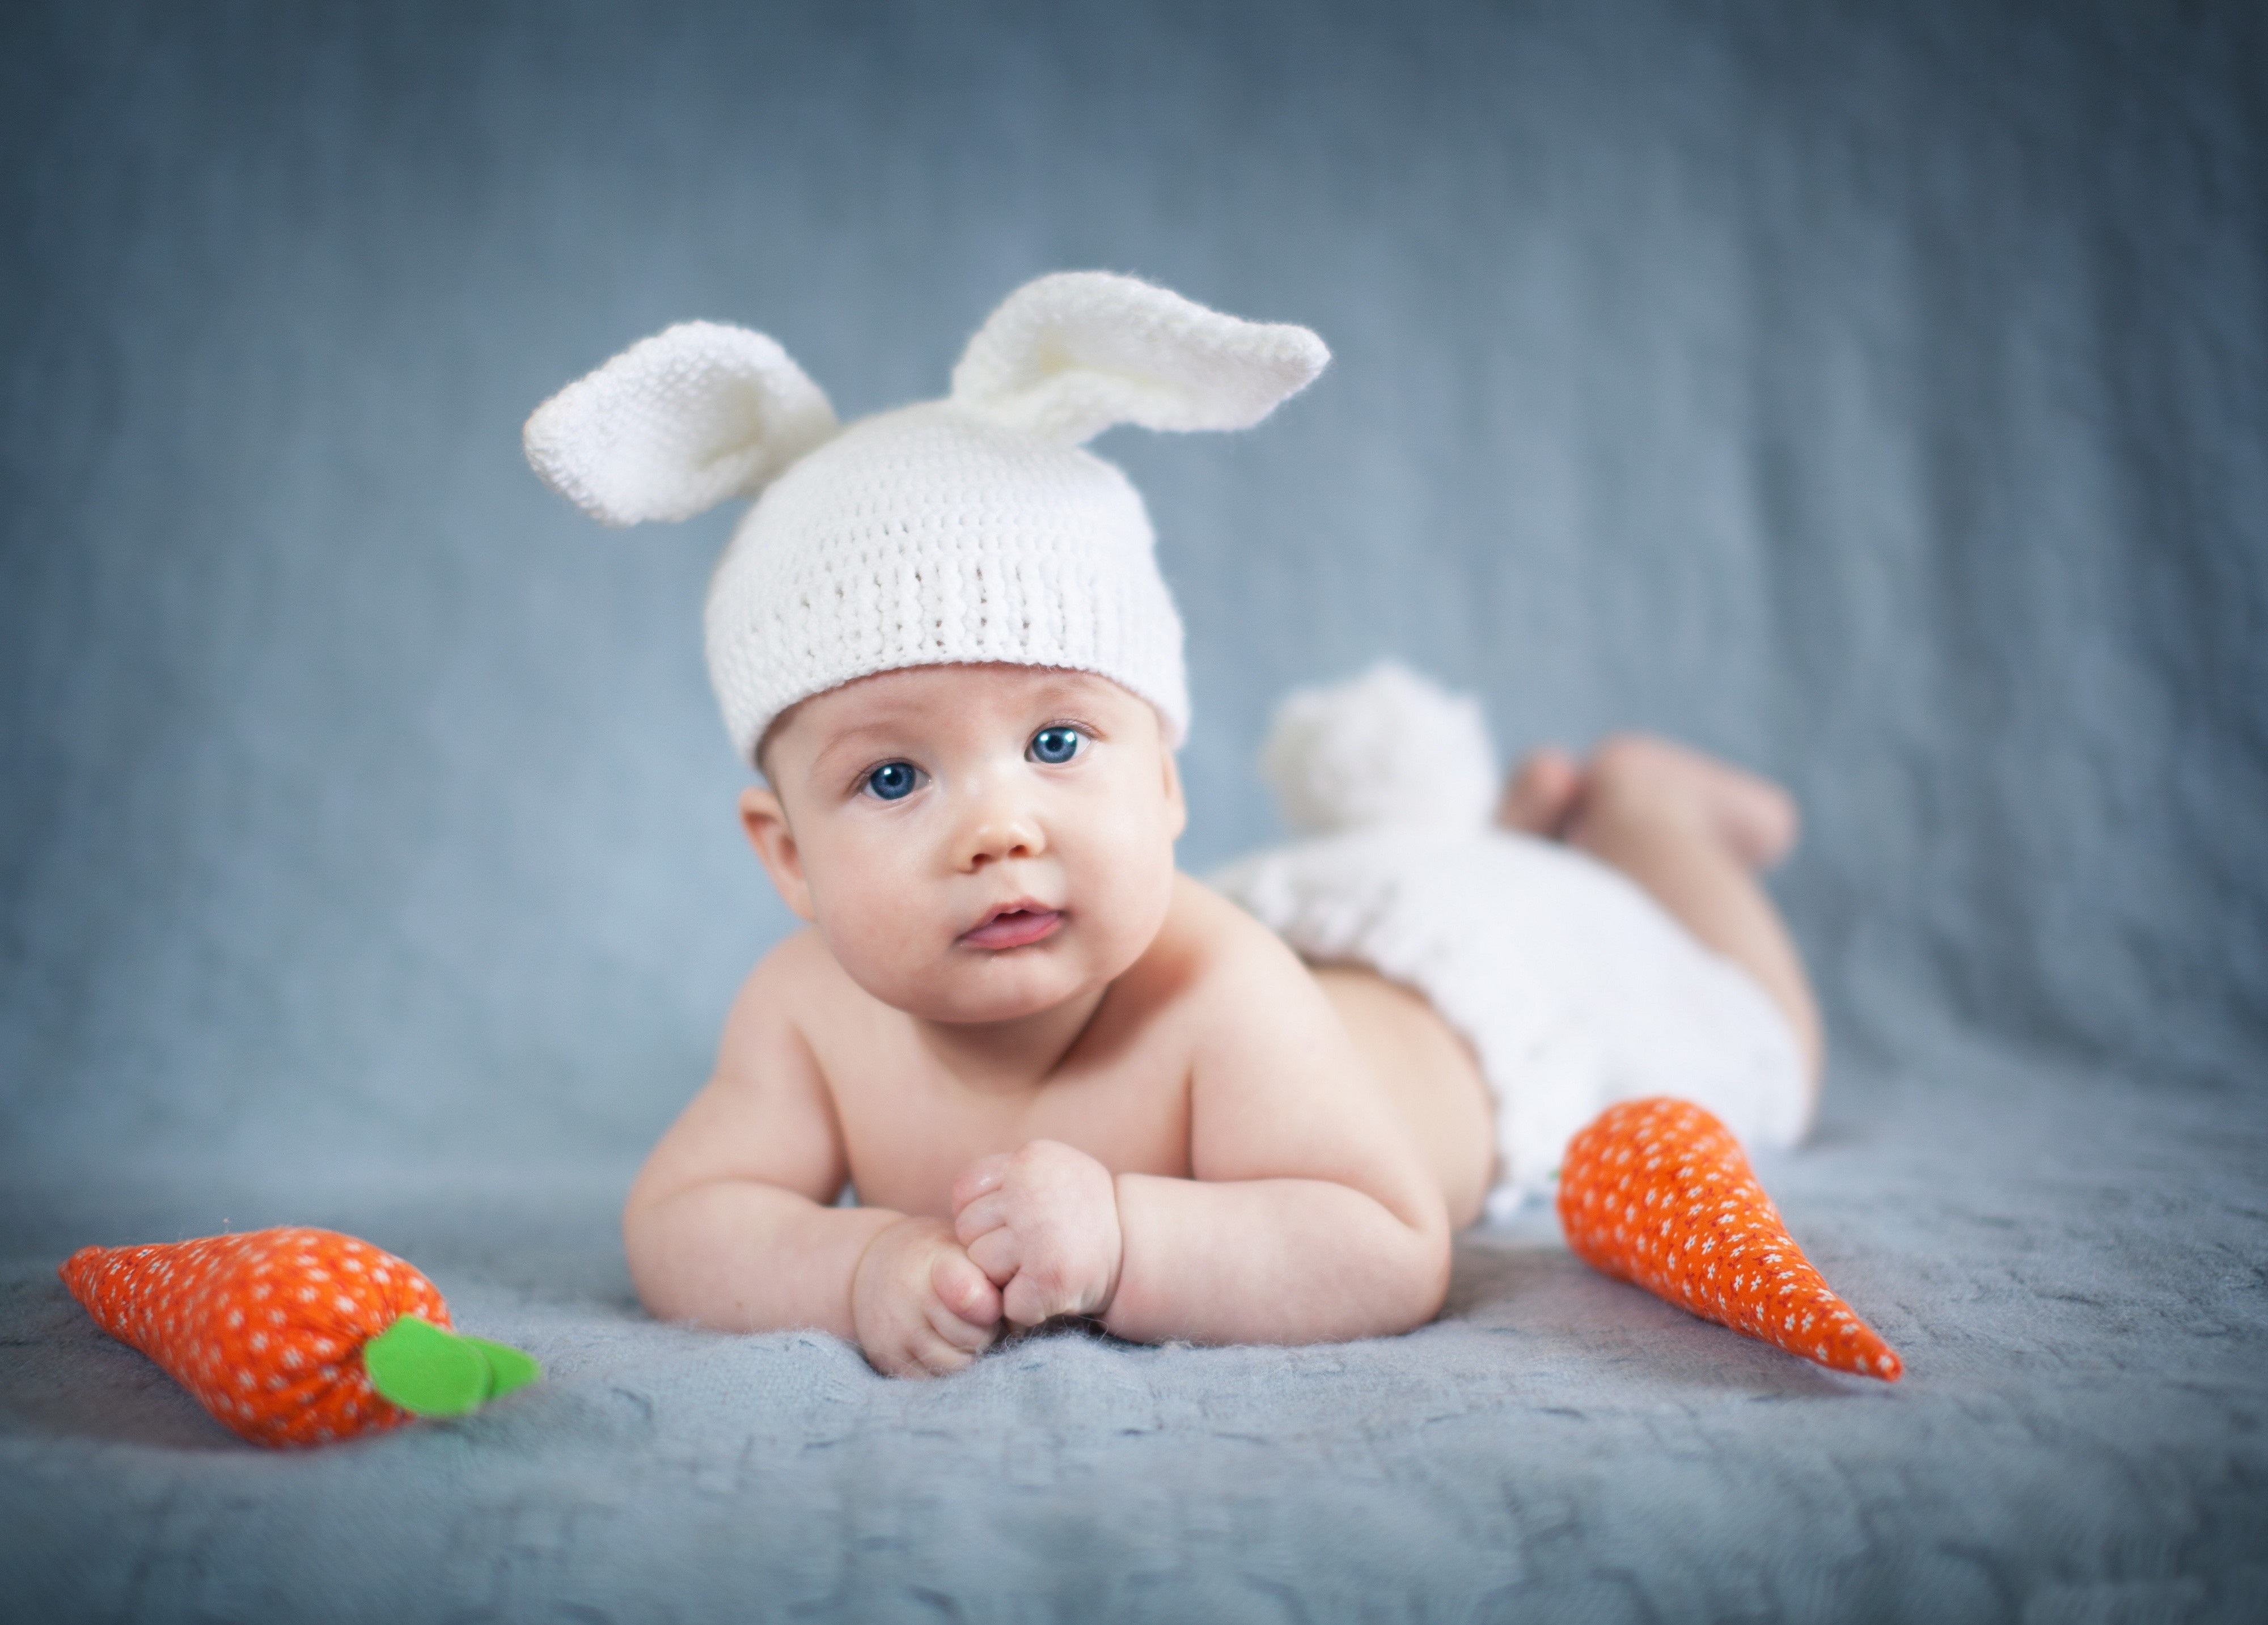 110+ 4K Baby Wallpapers | Background Images